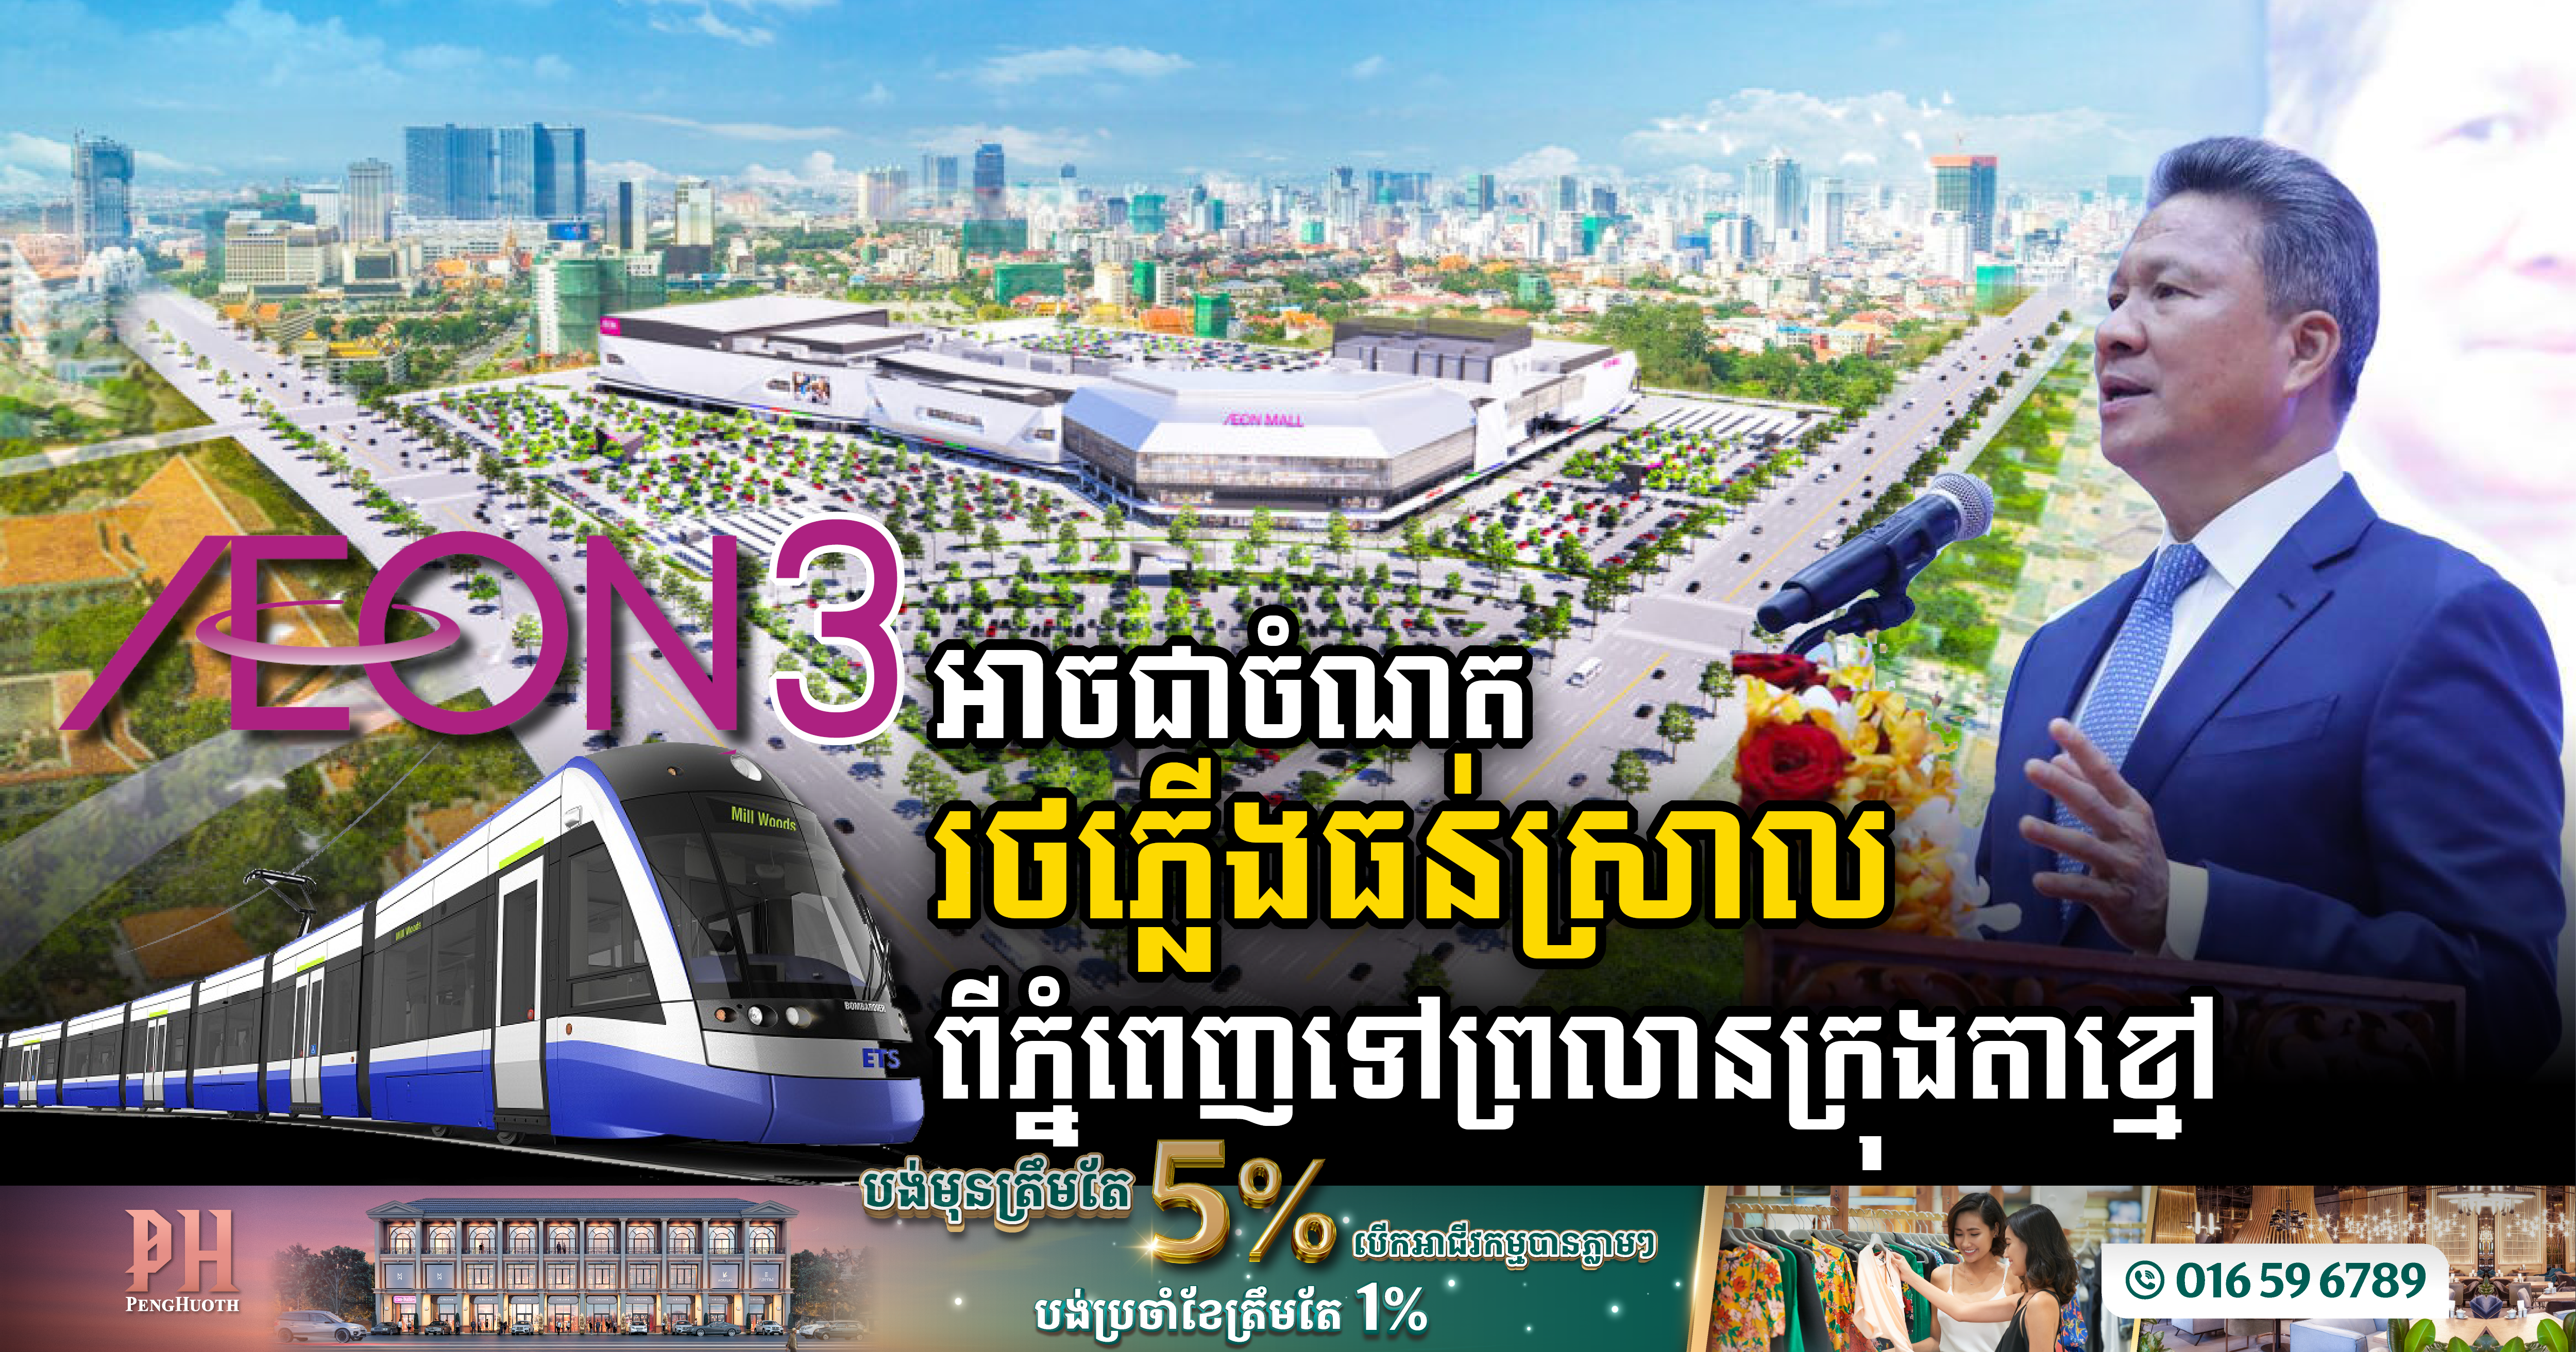 Aeon Mall Meanchey Selected as a Prime Station for Phnom Penh-Techo International Airport Rail Line